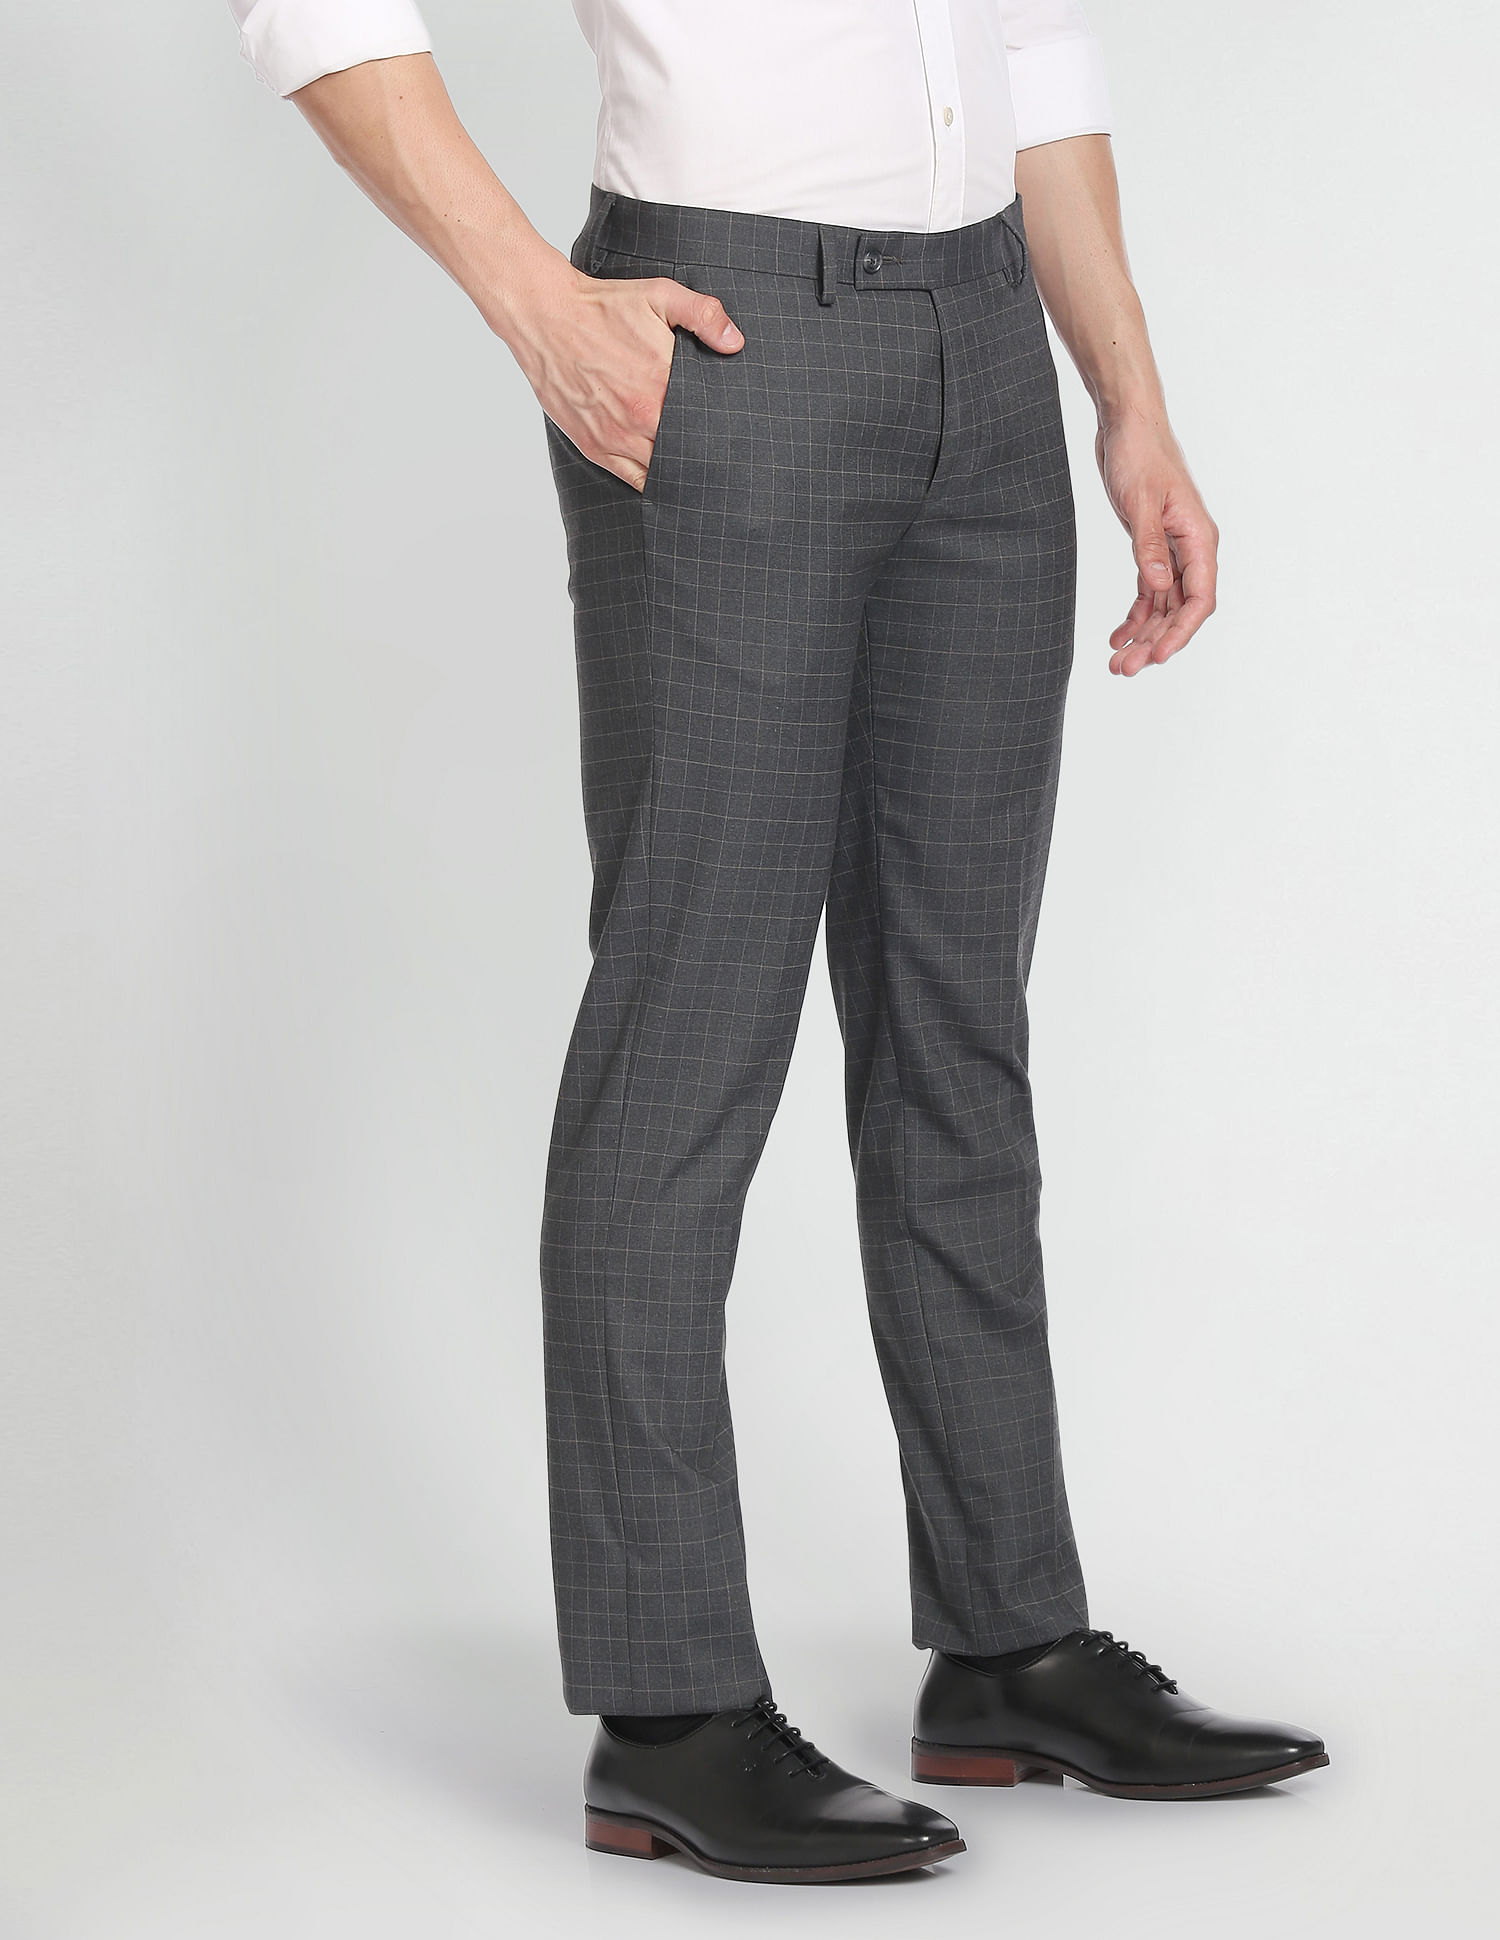 Selected Homme slim fit suit trousers in grey check | ASOS